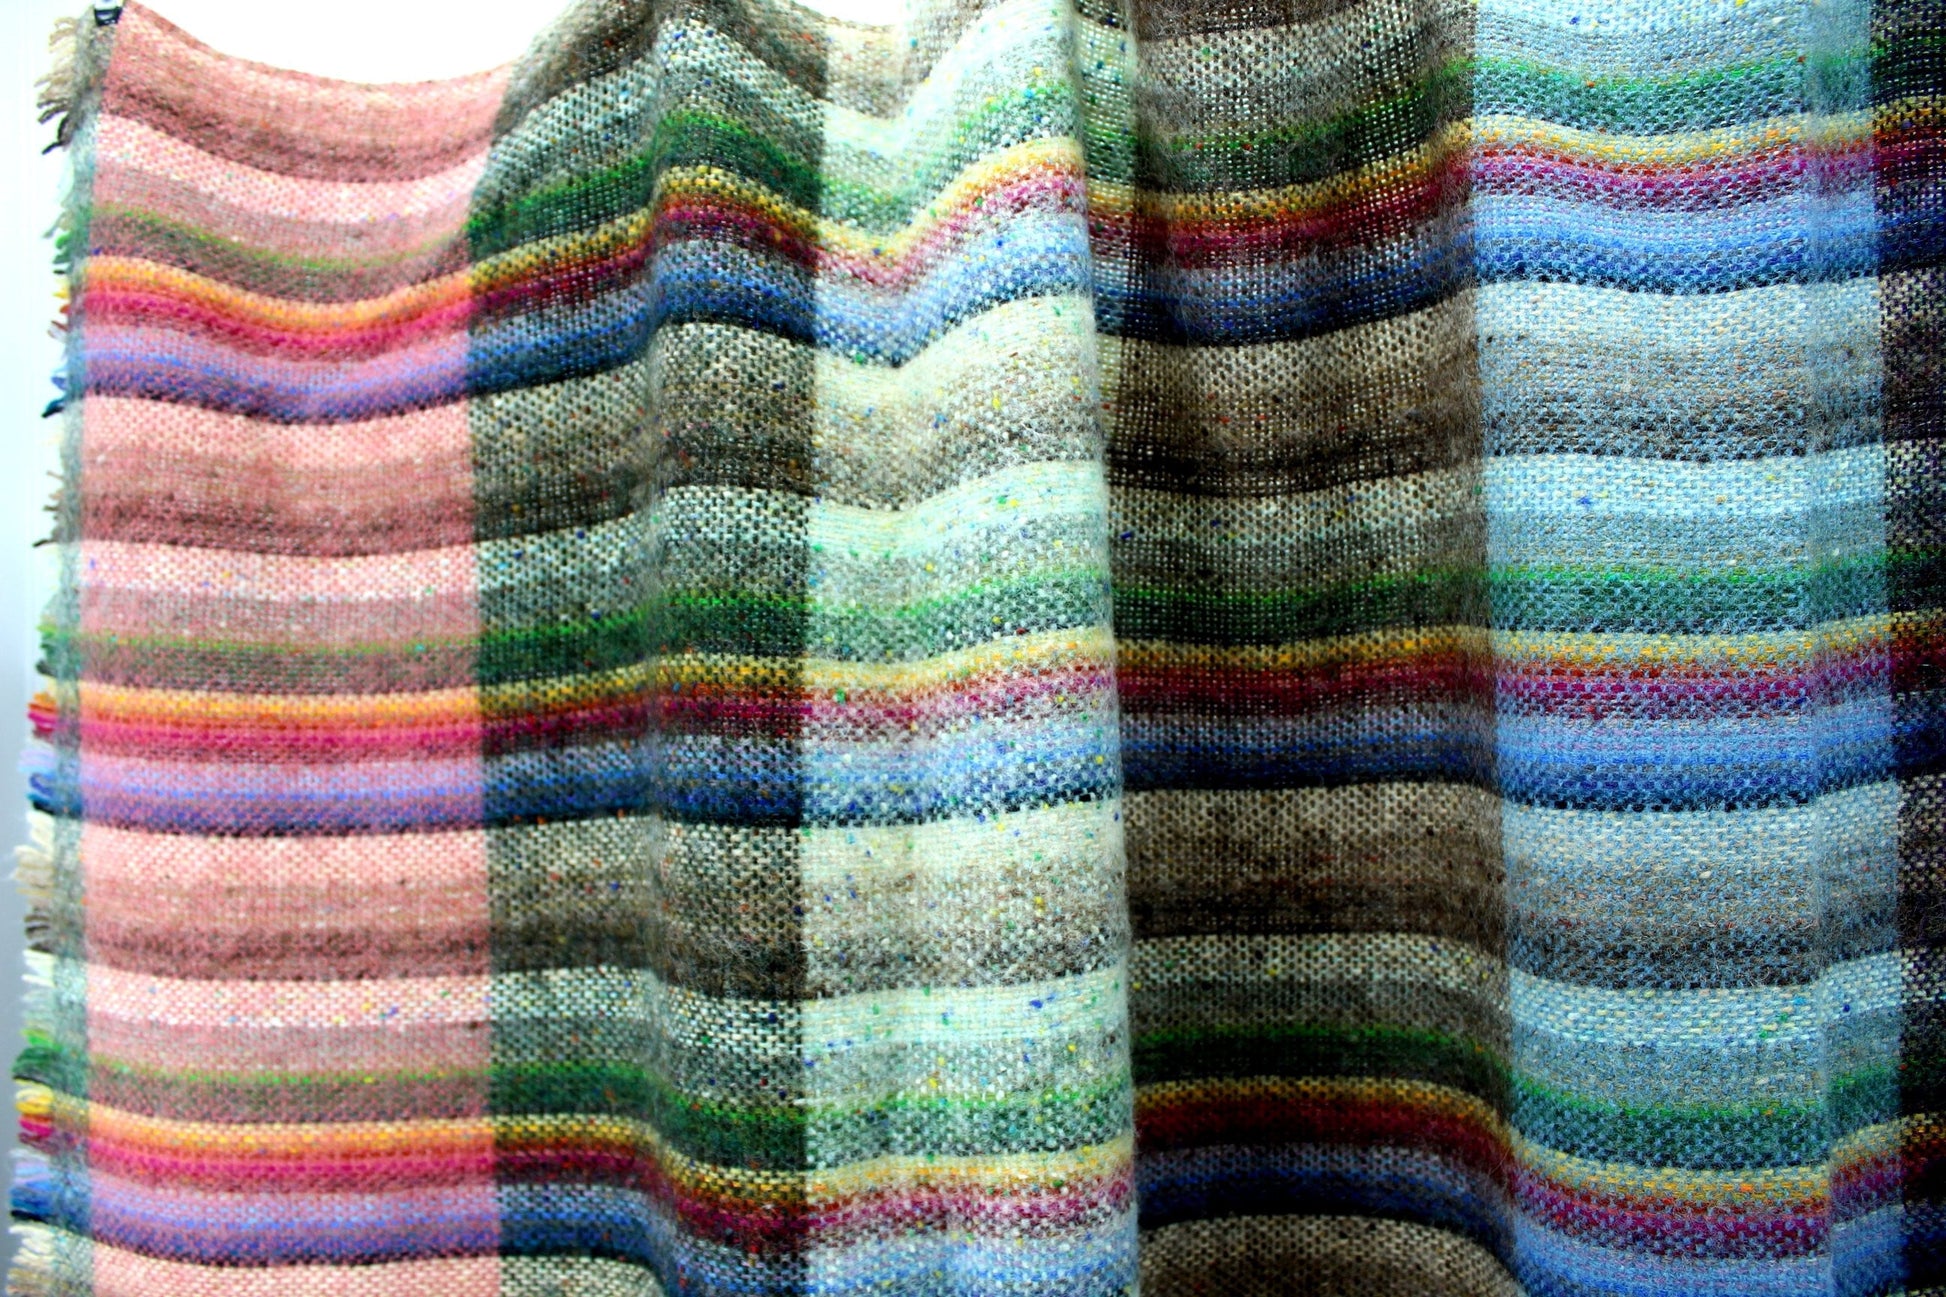 Donegal Handwoven Tweed John Molloy Throw Blanket - Lambswool Fringed Awesome wonderful bed cover